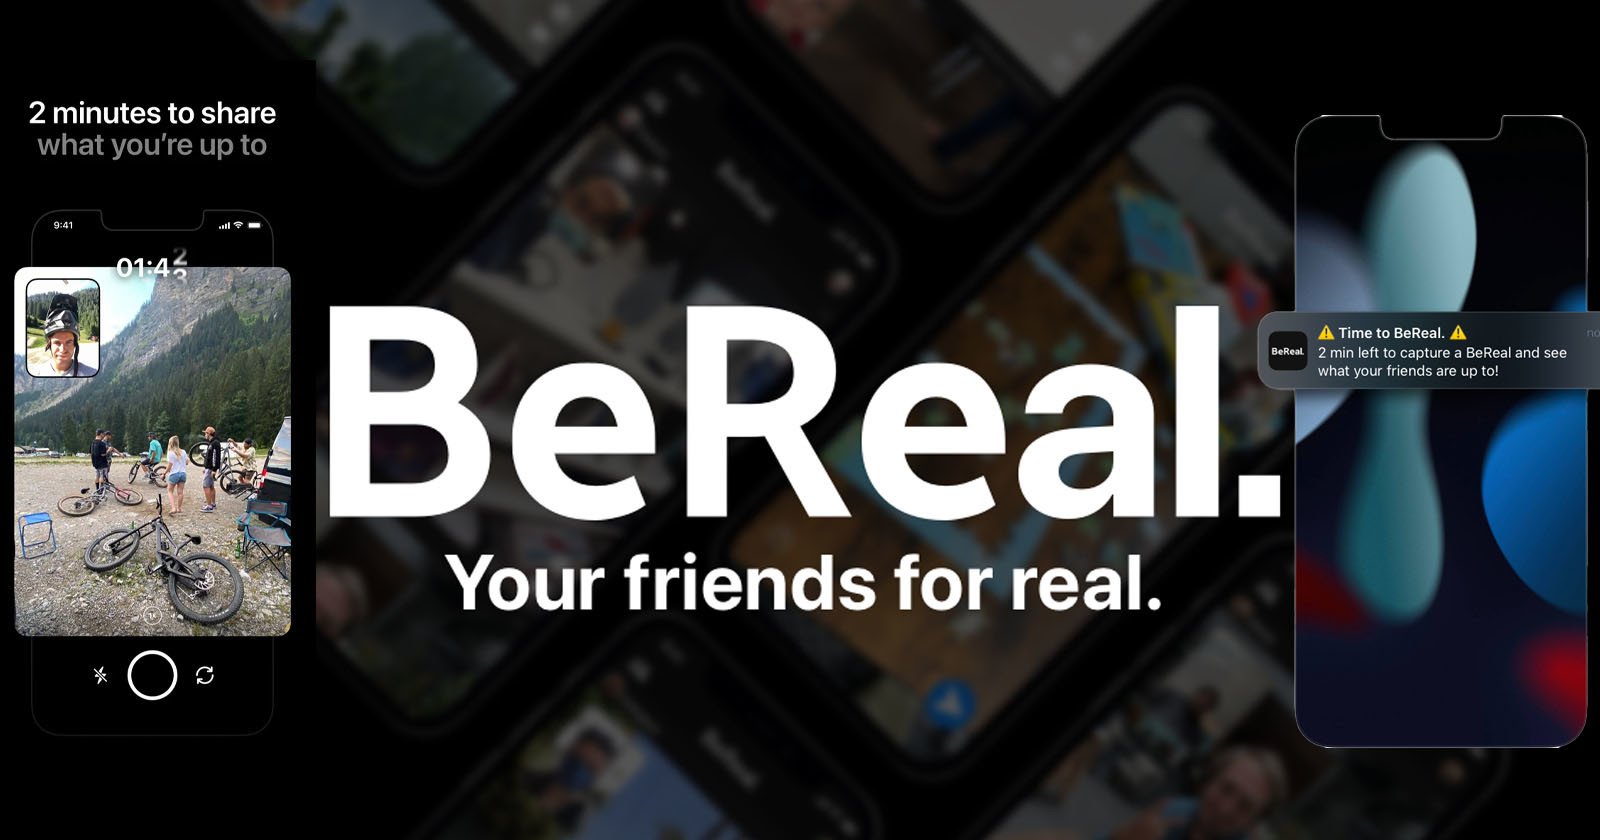 BeReal Raises $60M in Funding, Pushing Apps Valuation to $587M